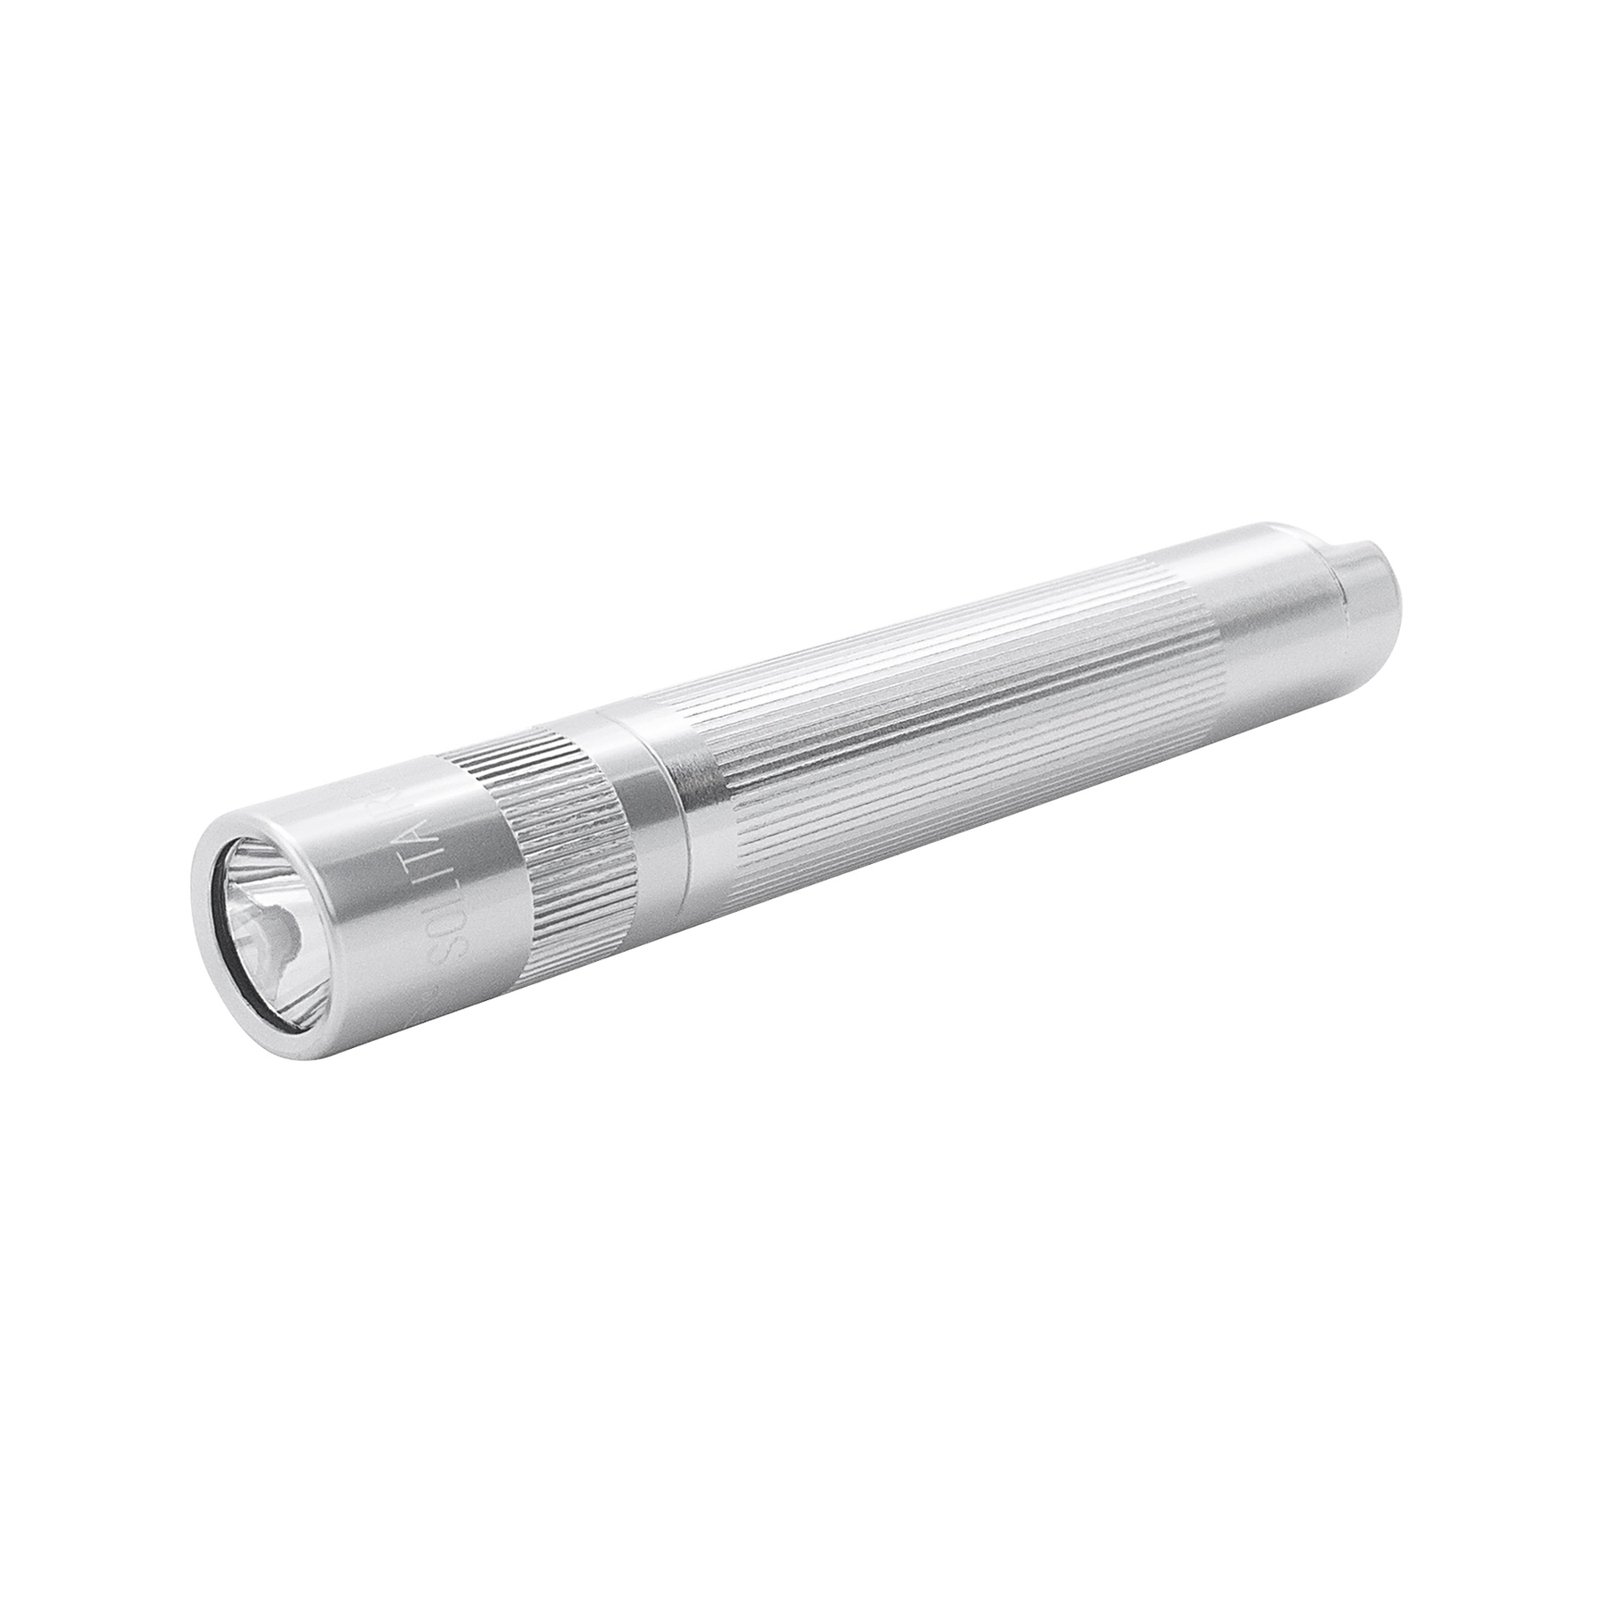 Maglite Xenon-lommelykt Solitaire 1-Cell AAA, sølv